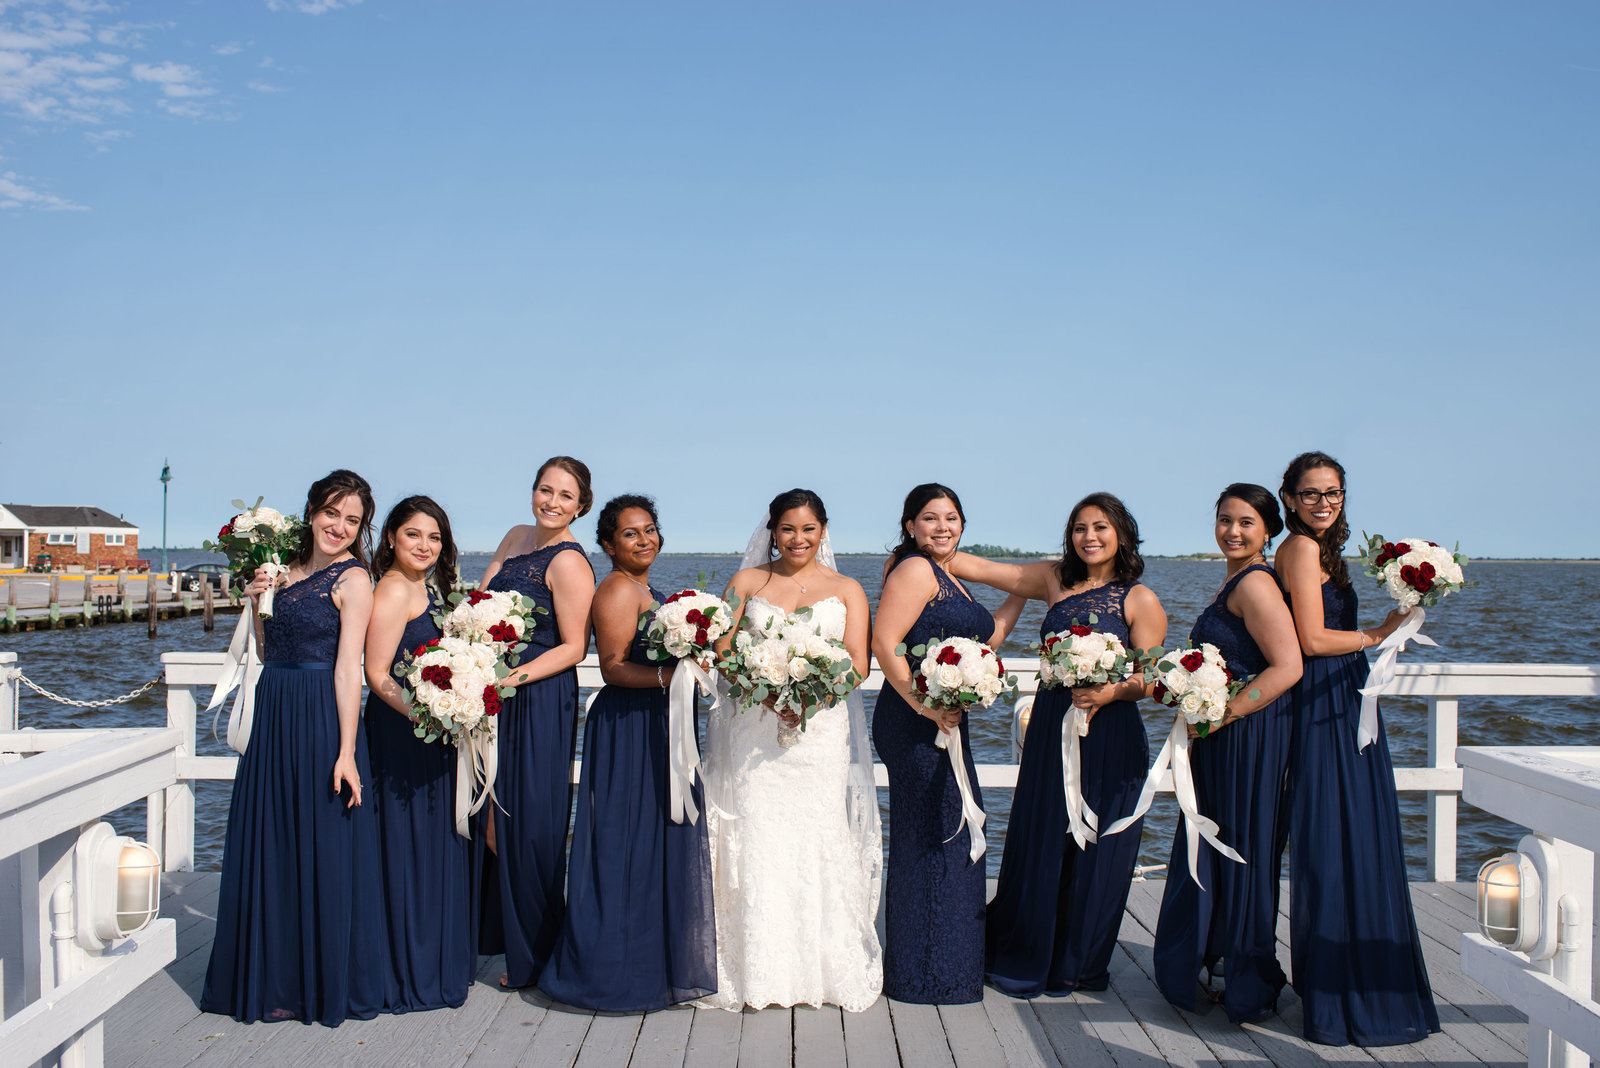 Bride and bridesmaids on dock